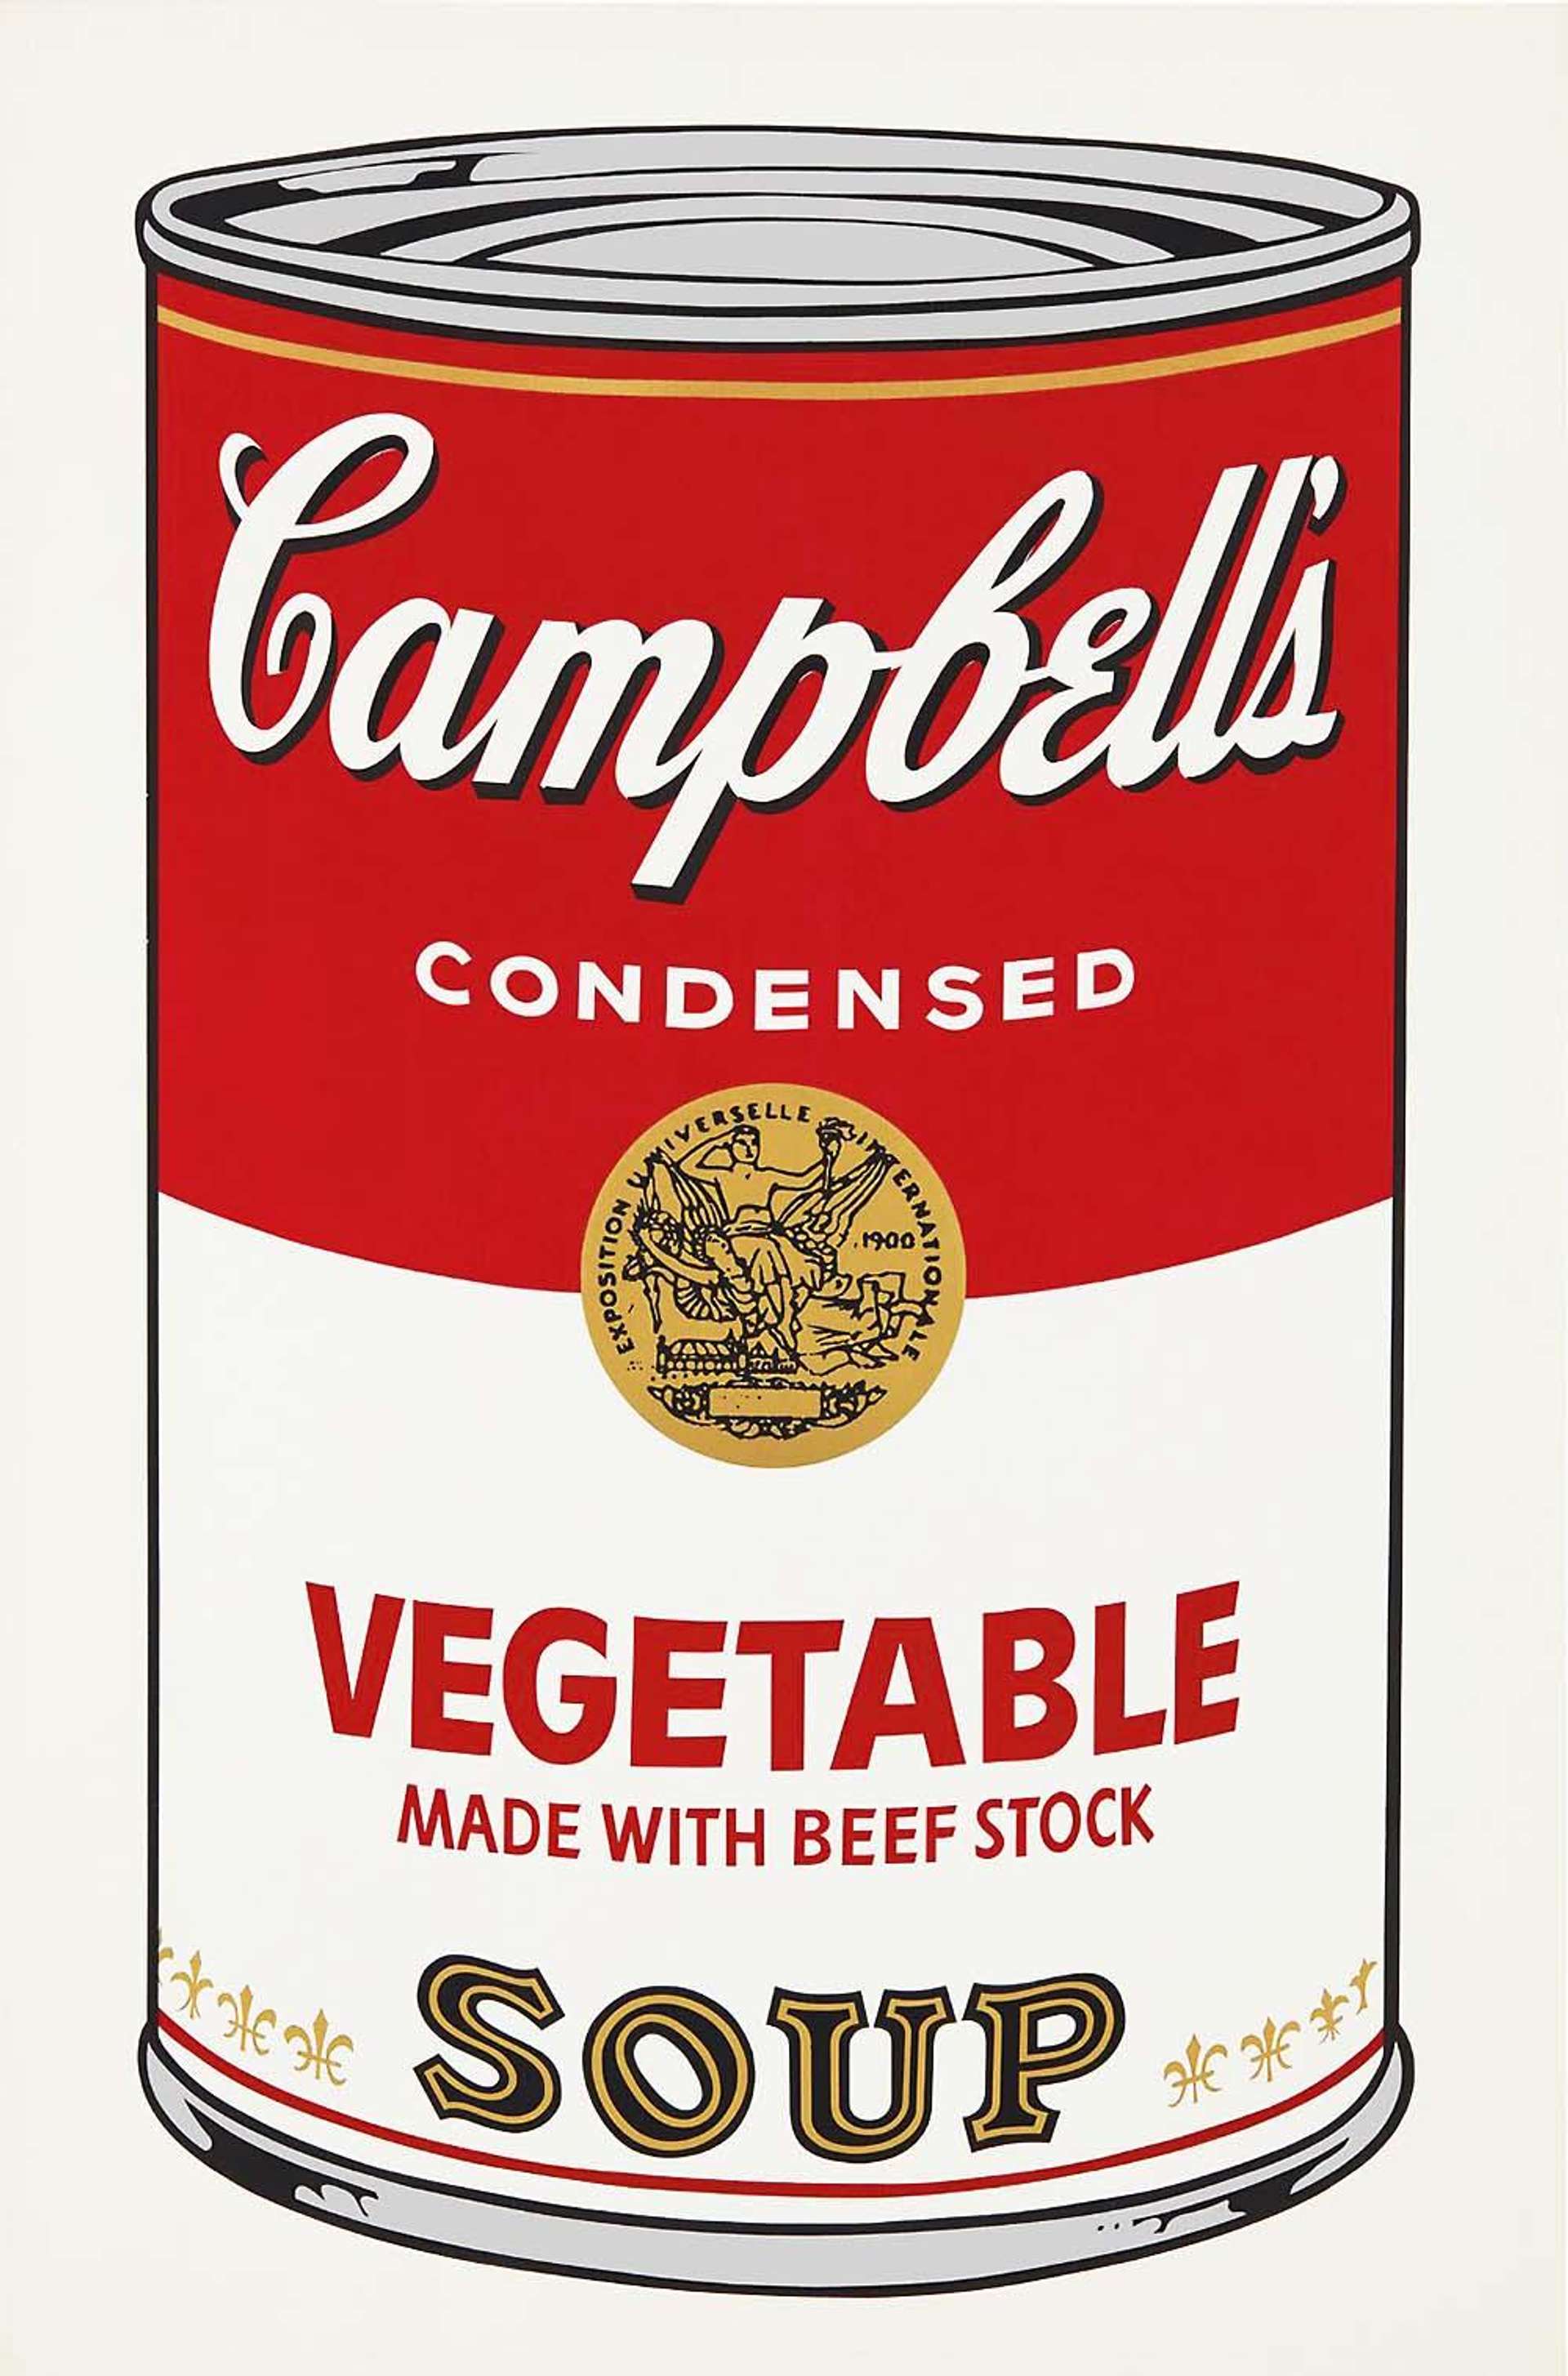 Pop Art style print of a Campbell’s vegetable soup can